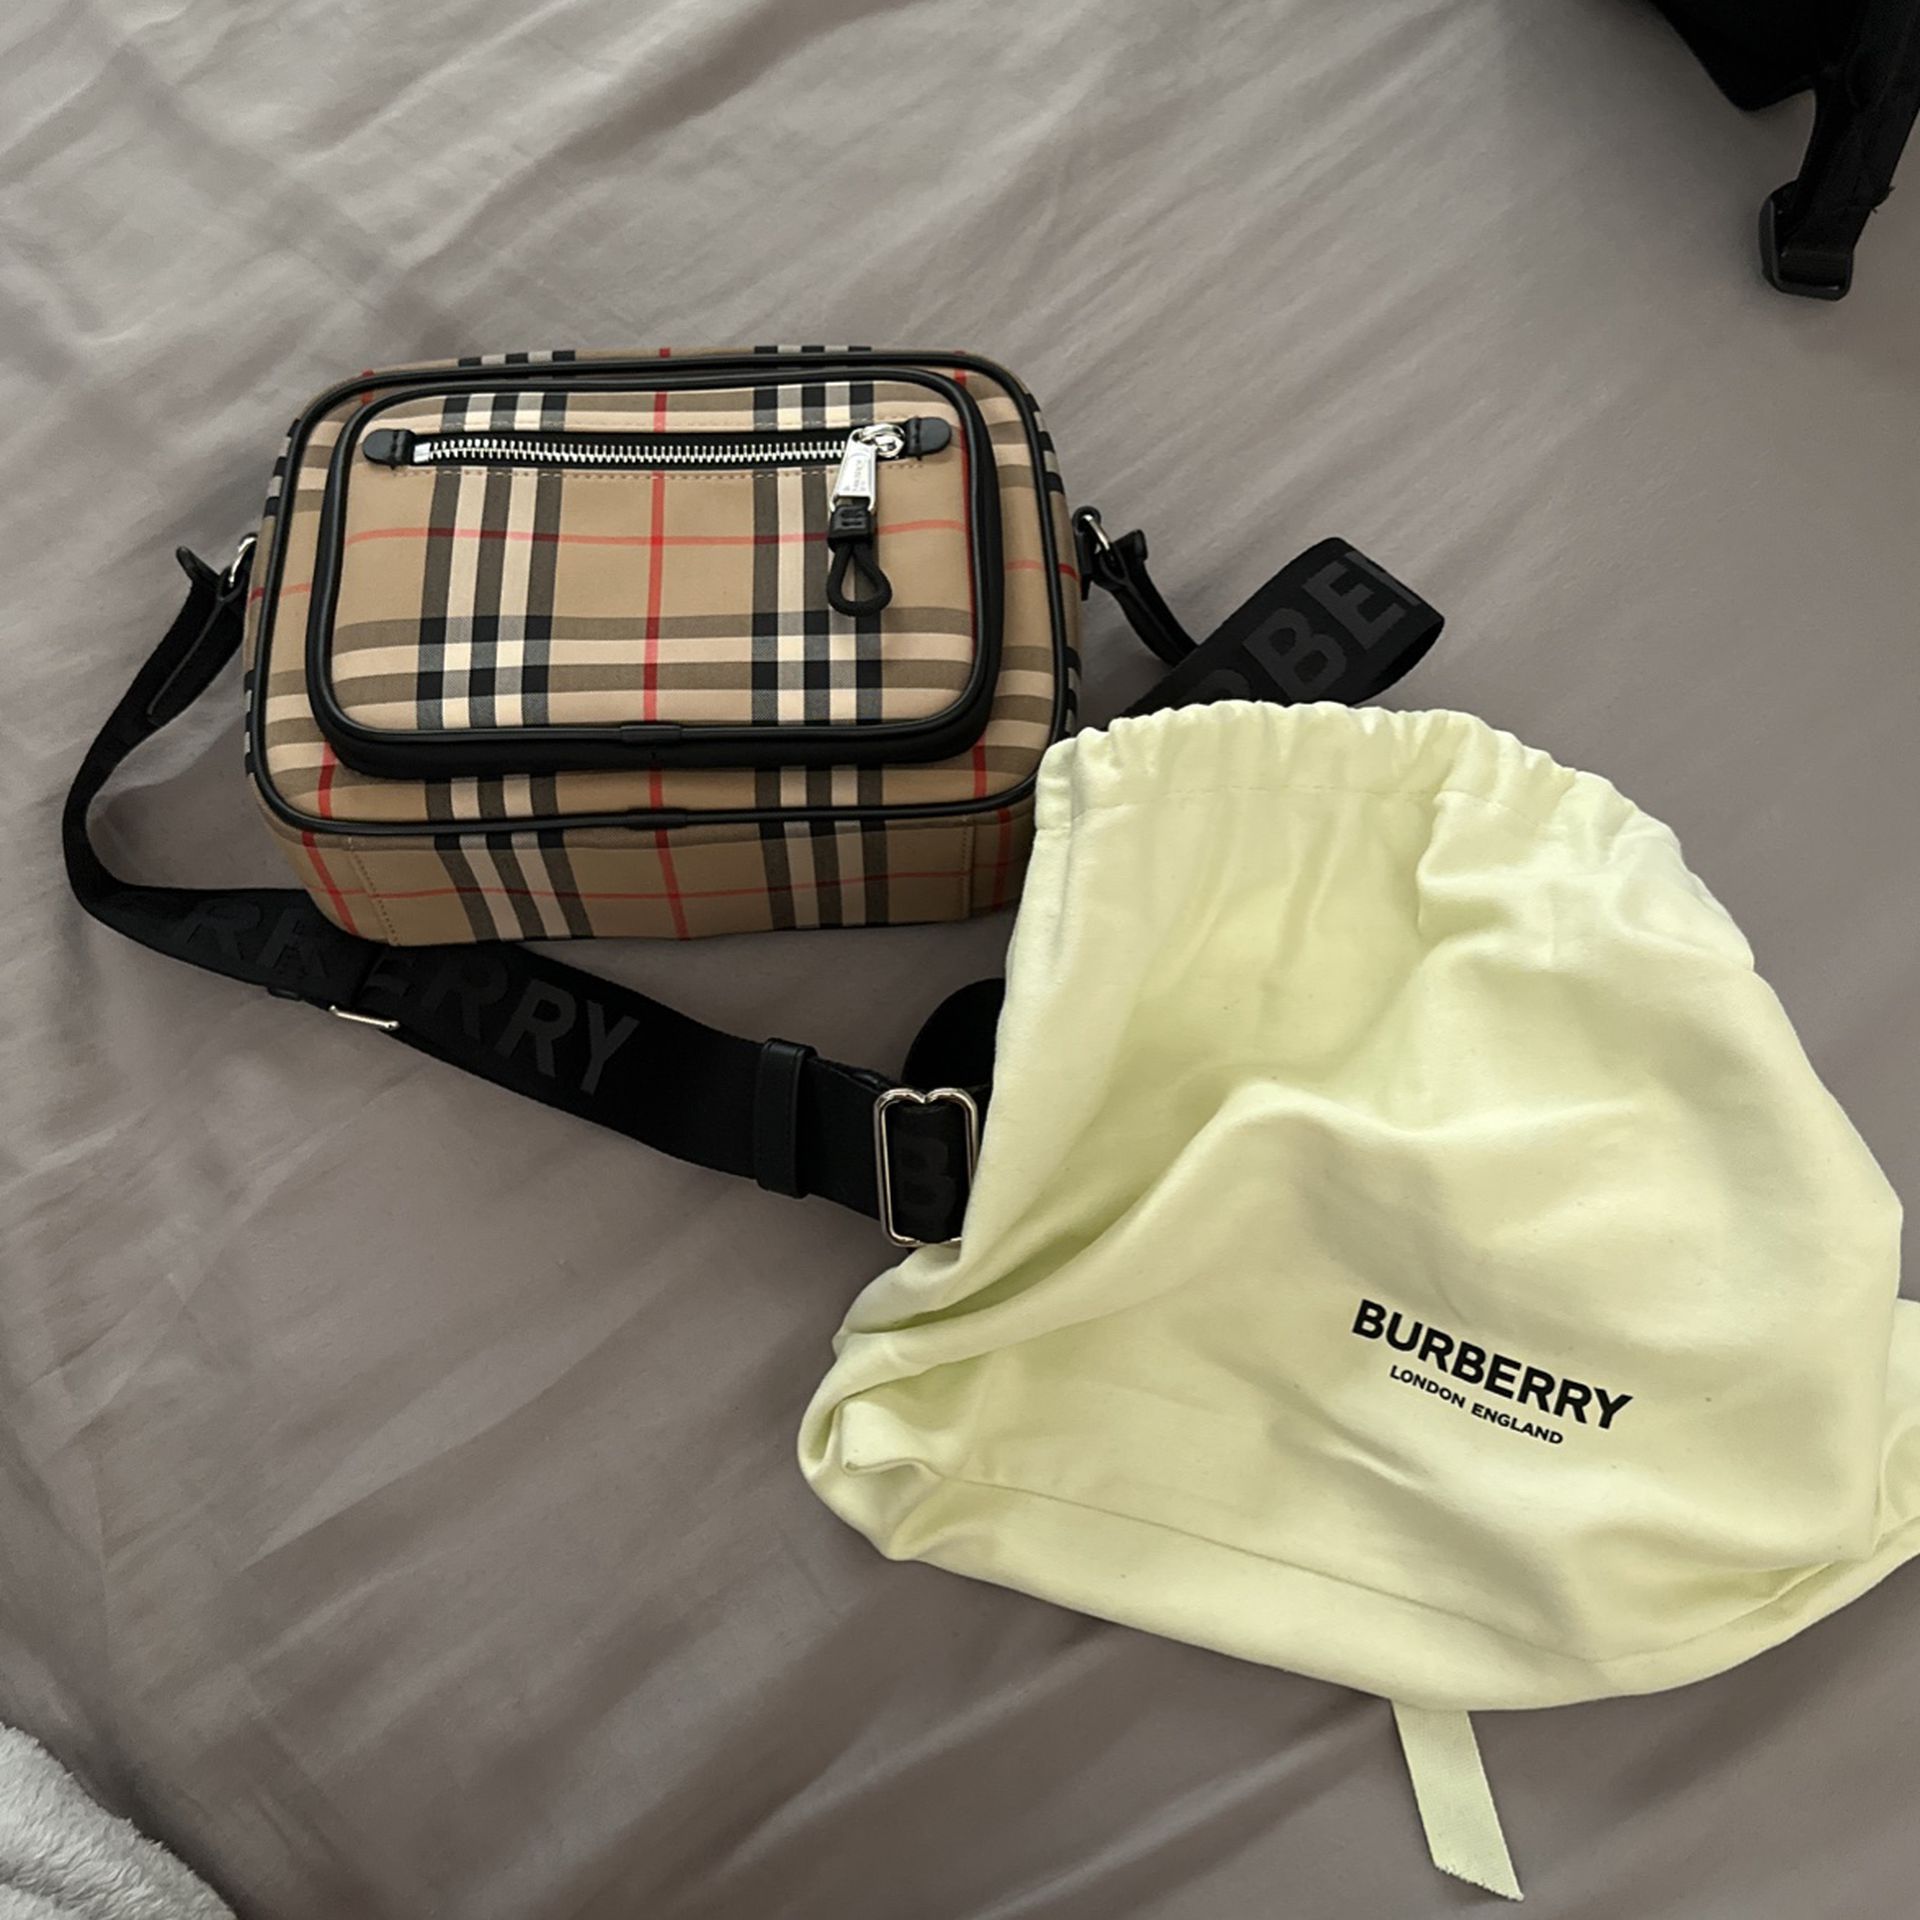 Burberry Cross Bag for Sale in Bronx, NY - OfferUp